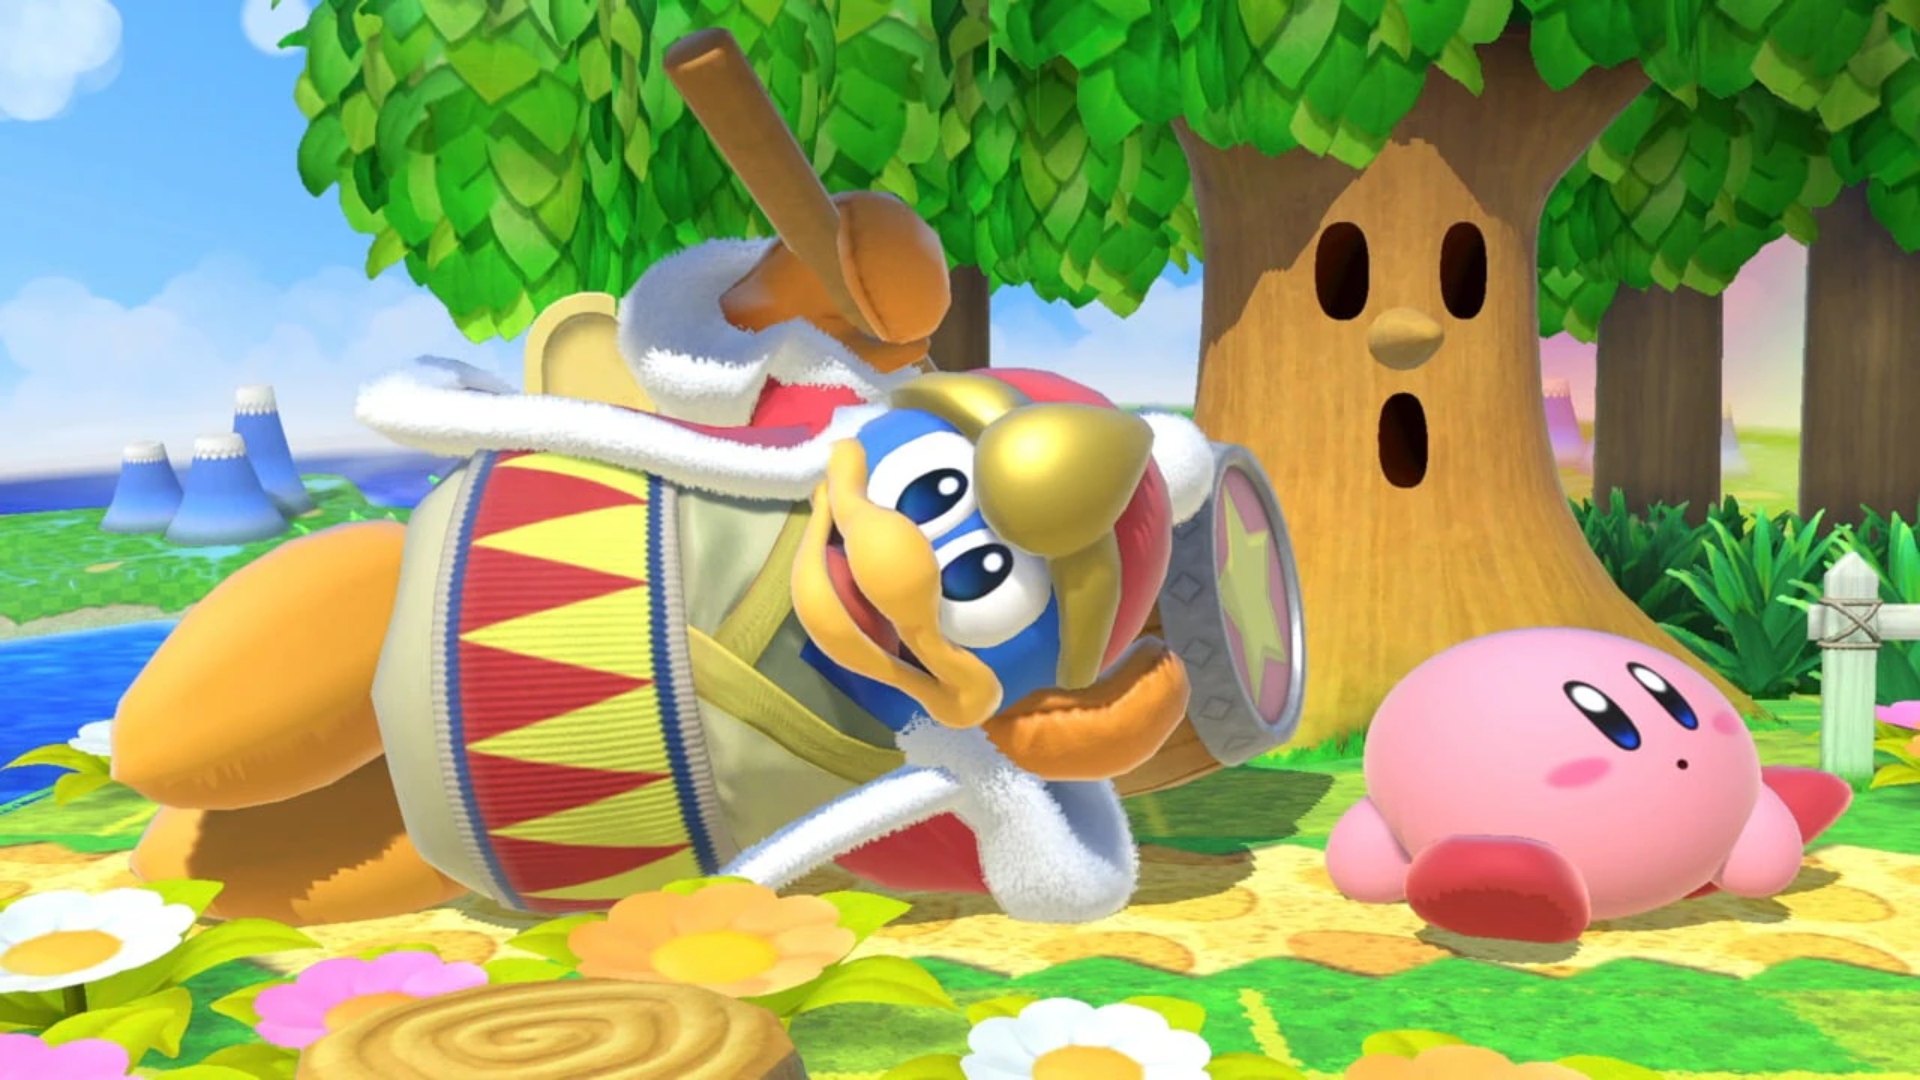 Best Kirby games: Super Smash Bros. Ultimate. Image shows Kirby and King Dedede in the game.